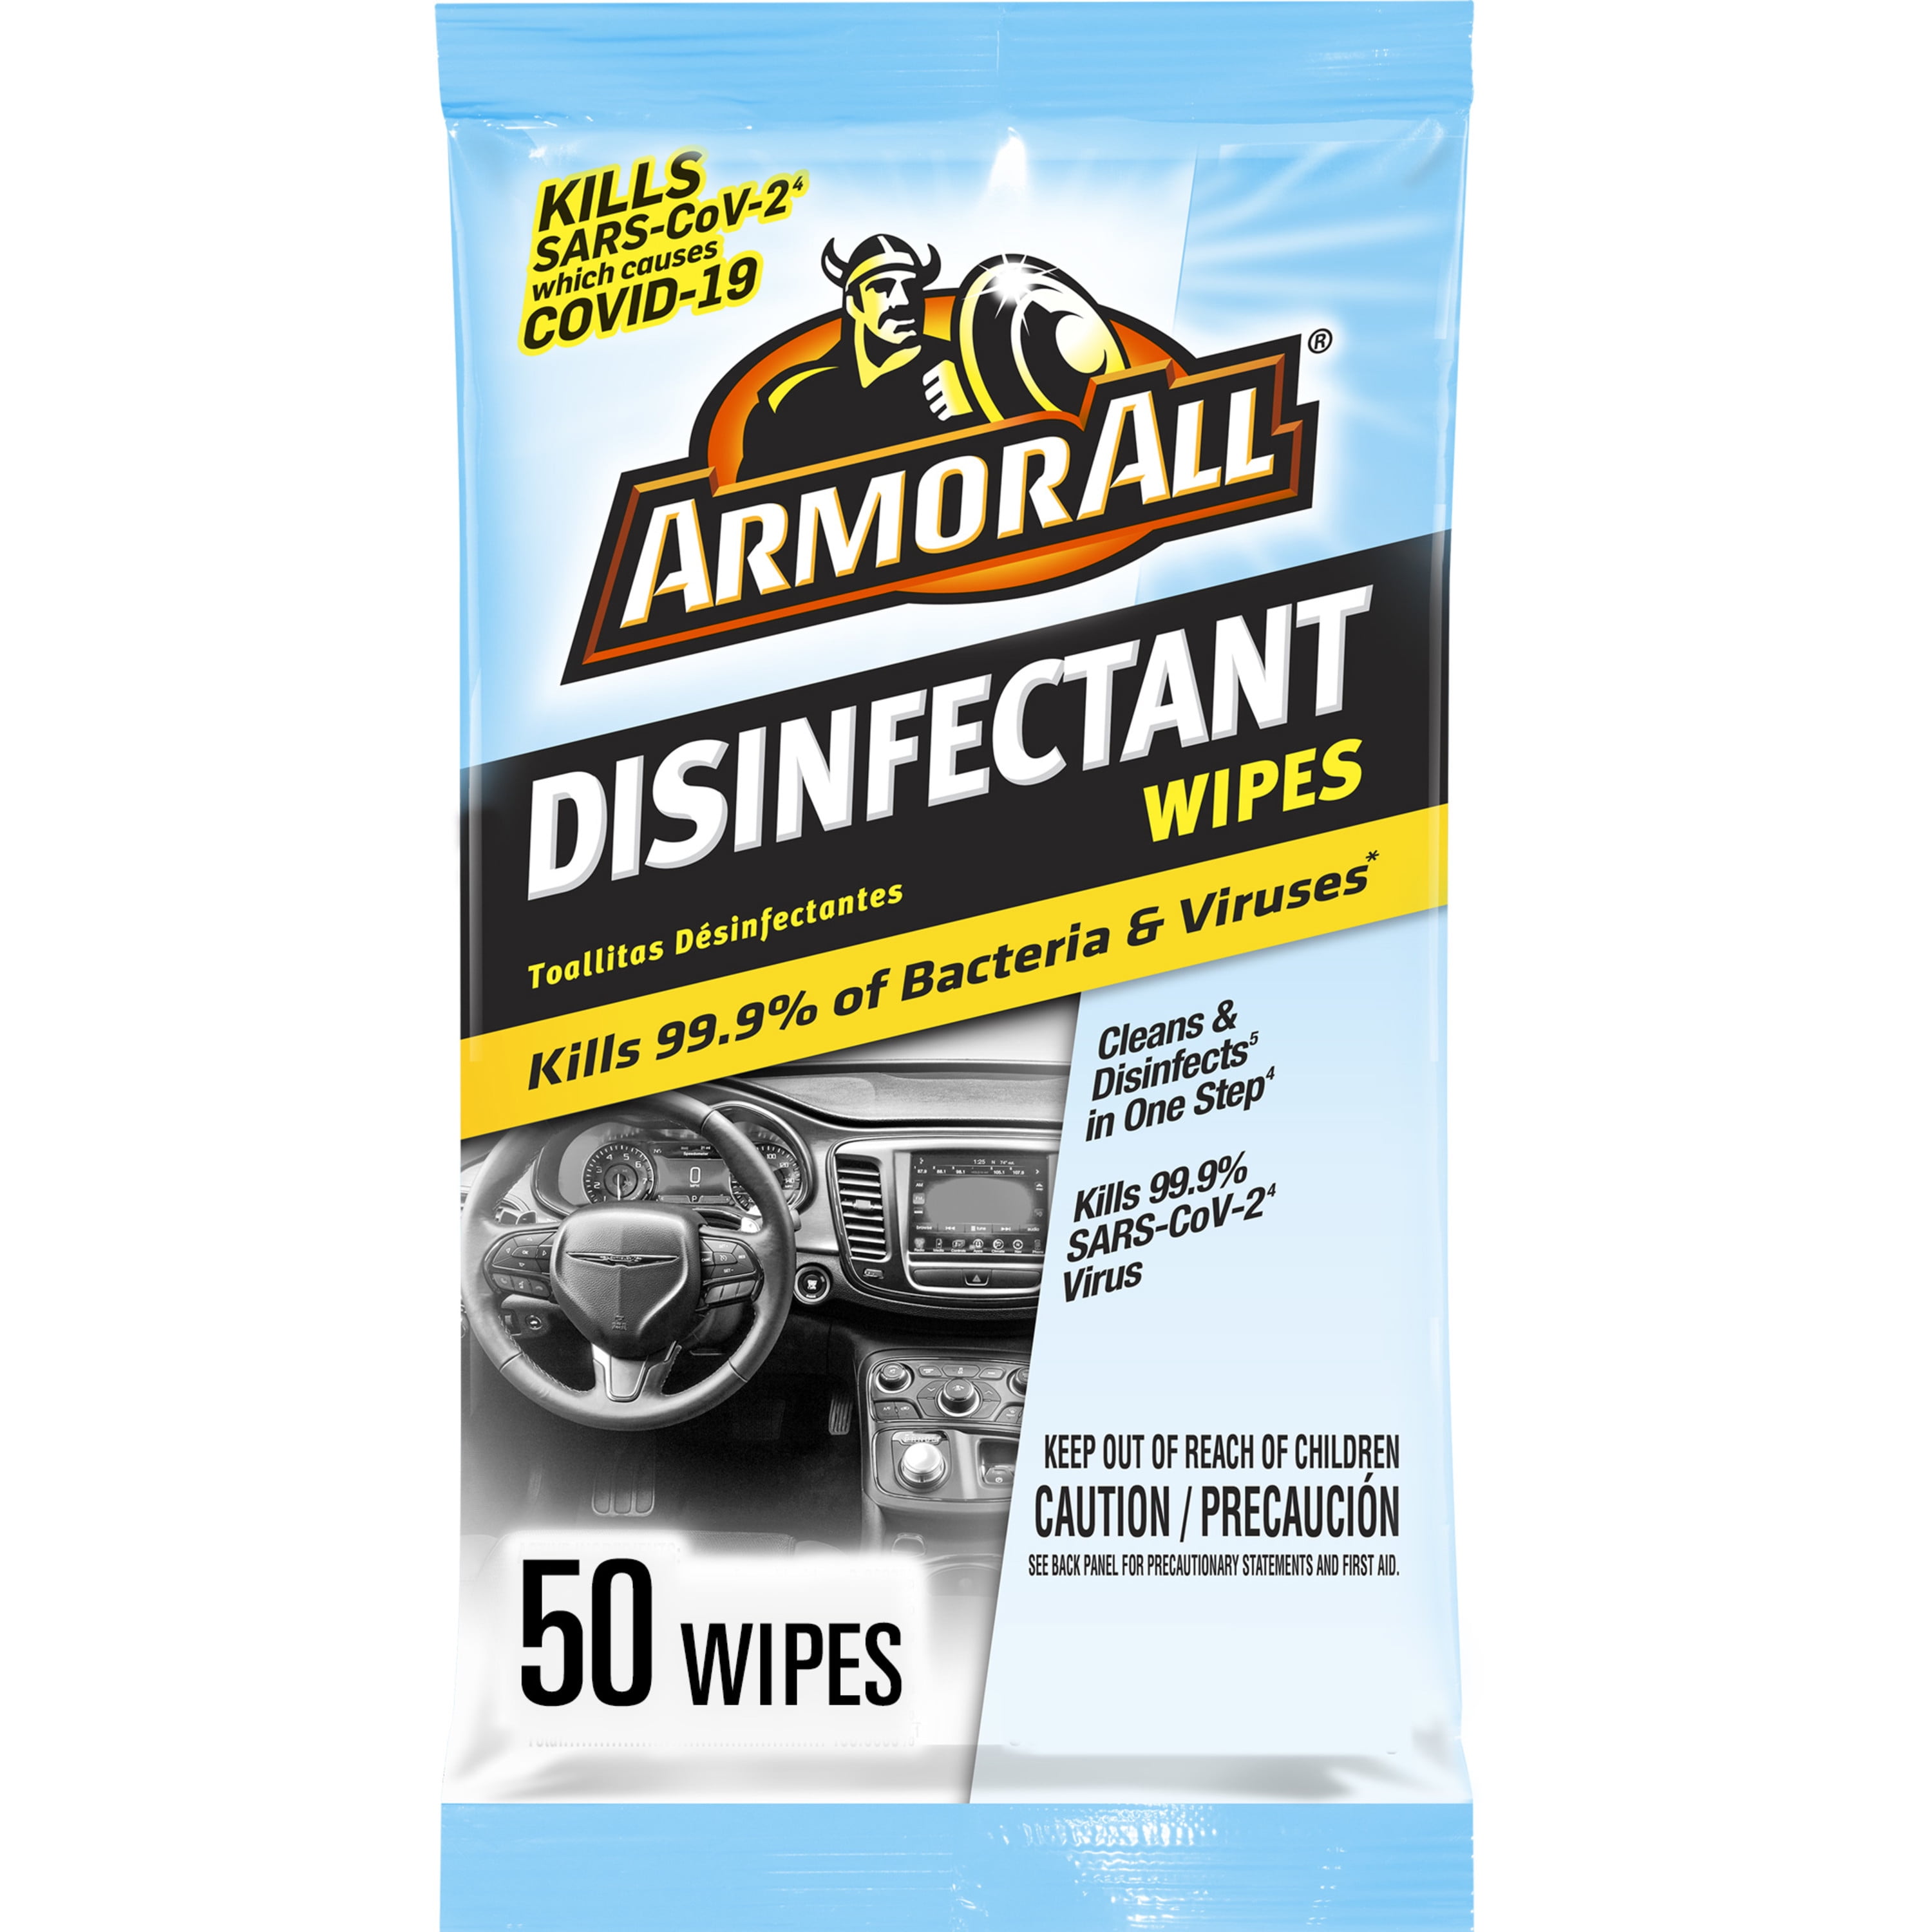 Armor All Original Car Protectant and Car Cleaning Wipes ( 2 - 30 Count  Packs)